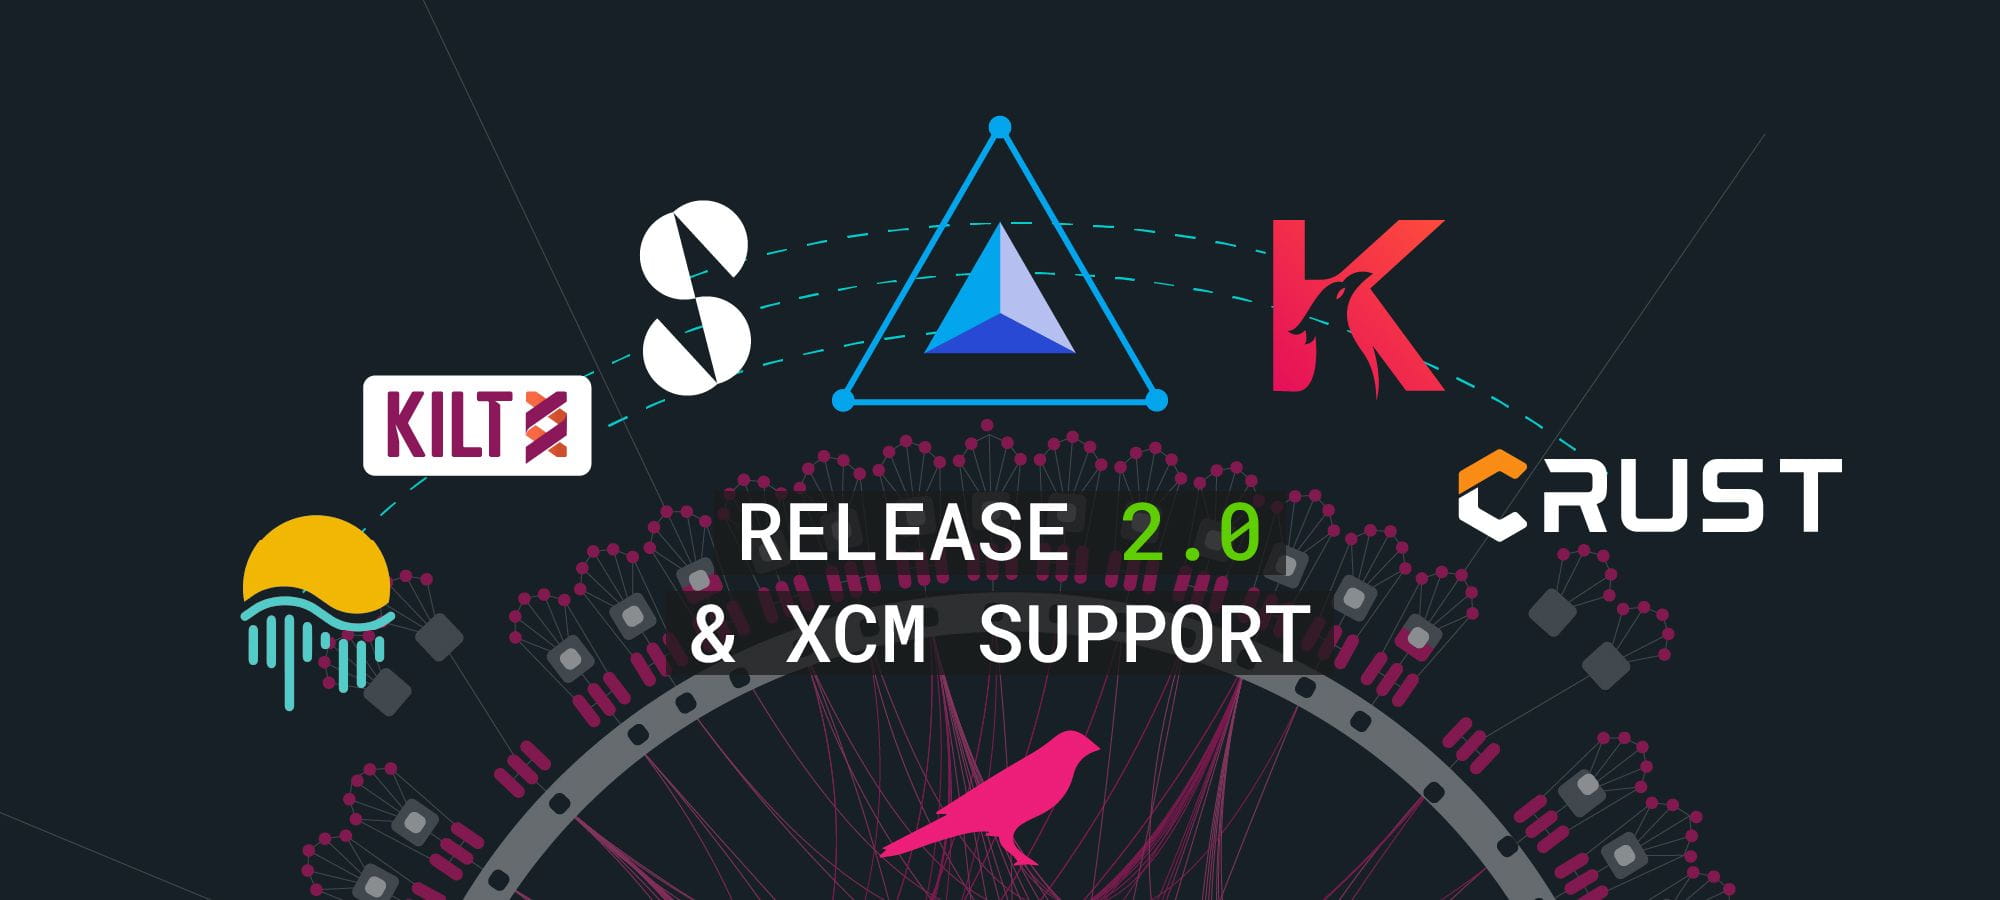 Release 2.0 & XCM support